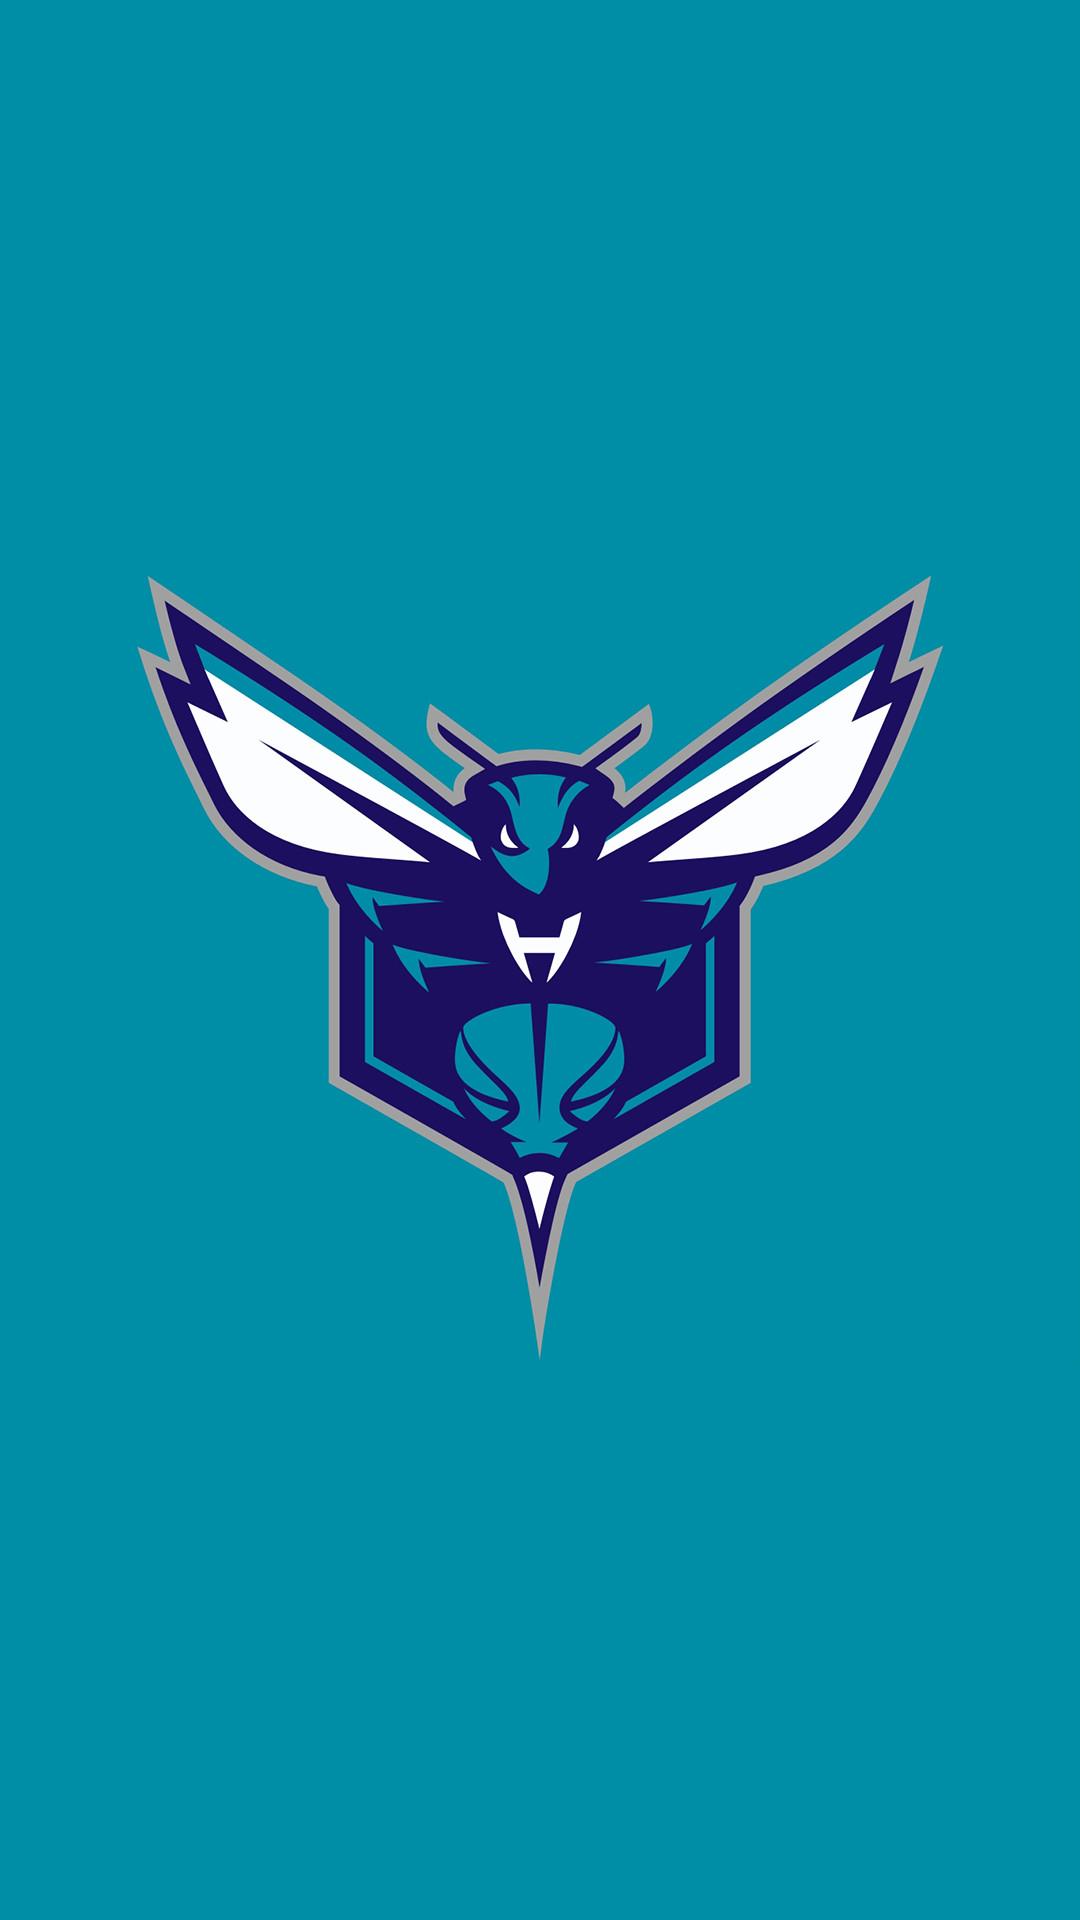 Charlotte Hornets on Twitter  WALLPAPER WEDNESDAY   Use this as  your phones wallpaper  Screenshot  Reply to this tweet   Well provide a new wallpaper each Wednesday BuzzCity  httpstco5qRPpUriNl  Twitter